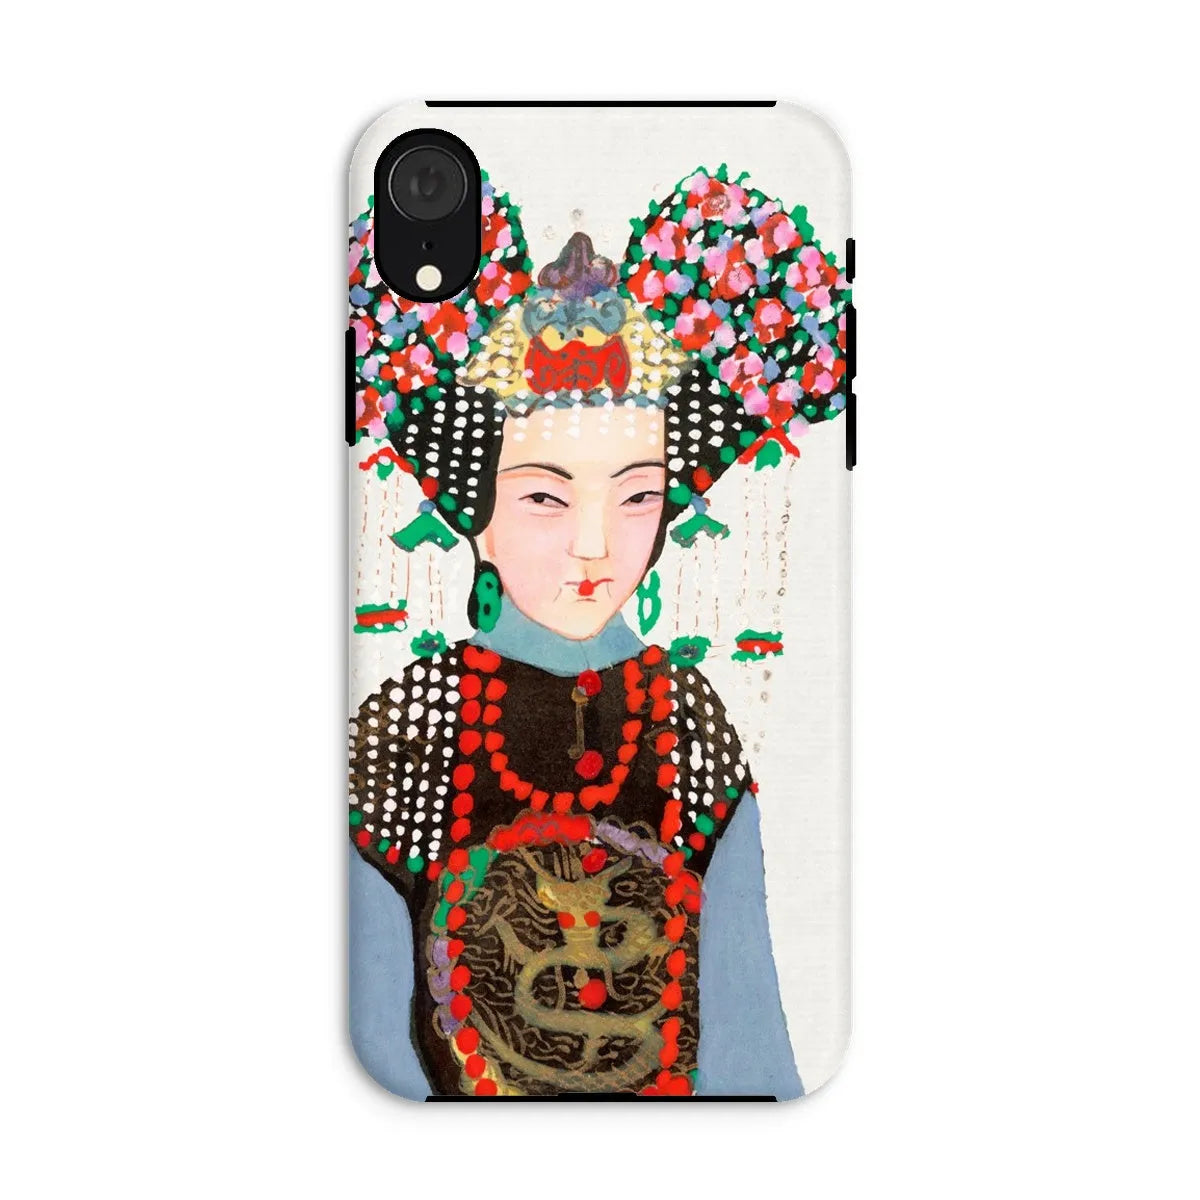 Chinese Empress - Manchu Art Phone Case - Iphone Xr / Matte - Mobile Phone Cases - Aesthetic Art